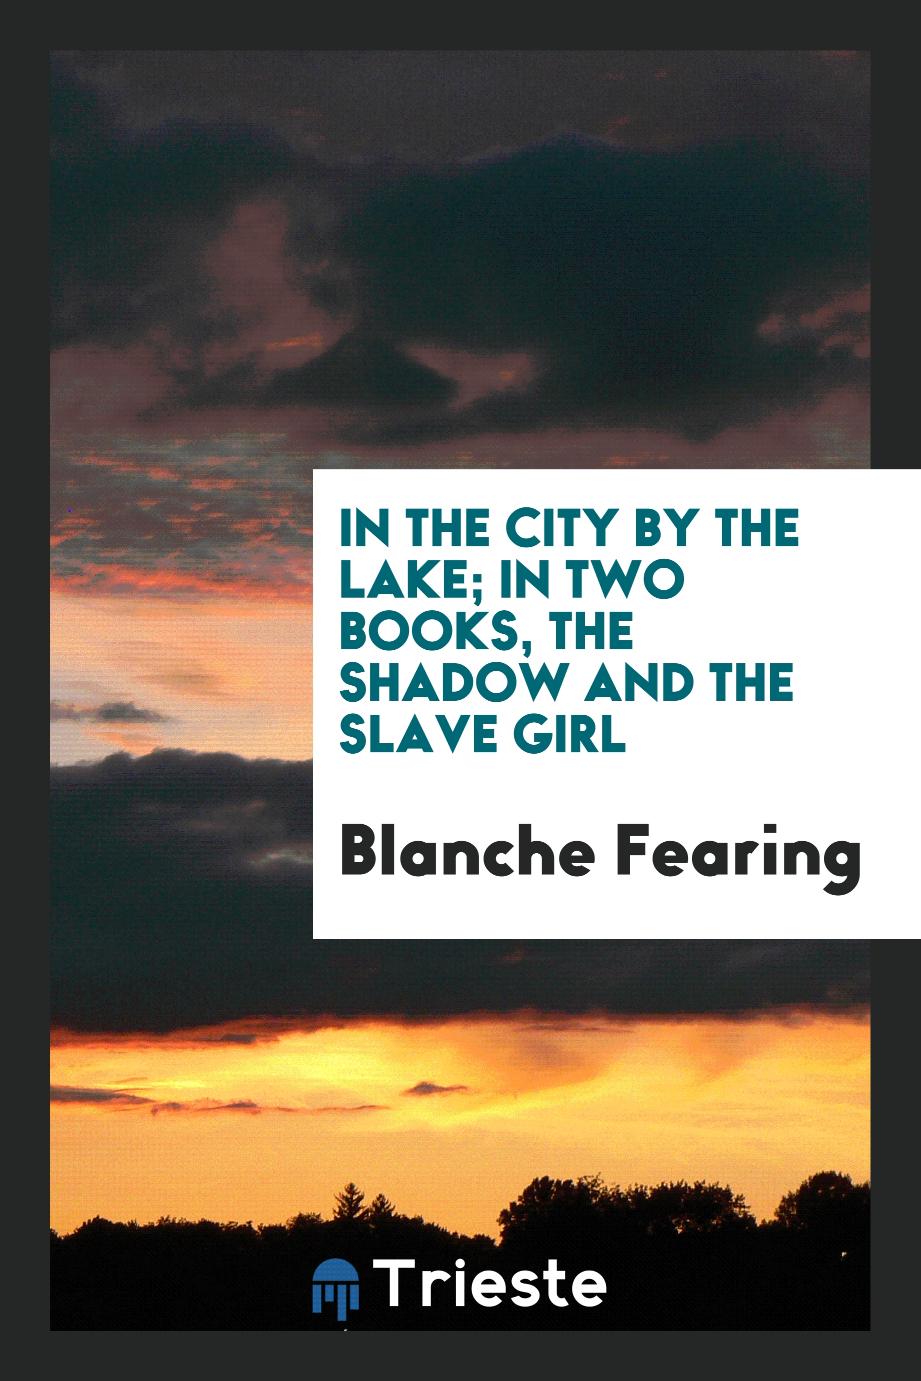 In the city by the lake; in two books, The Shadow and The Slave Girl